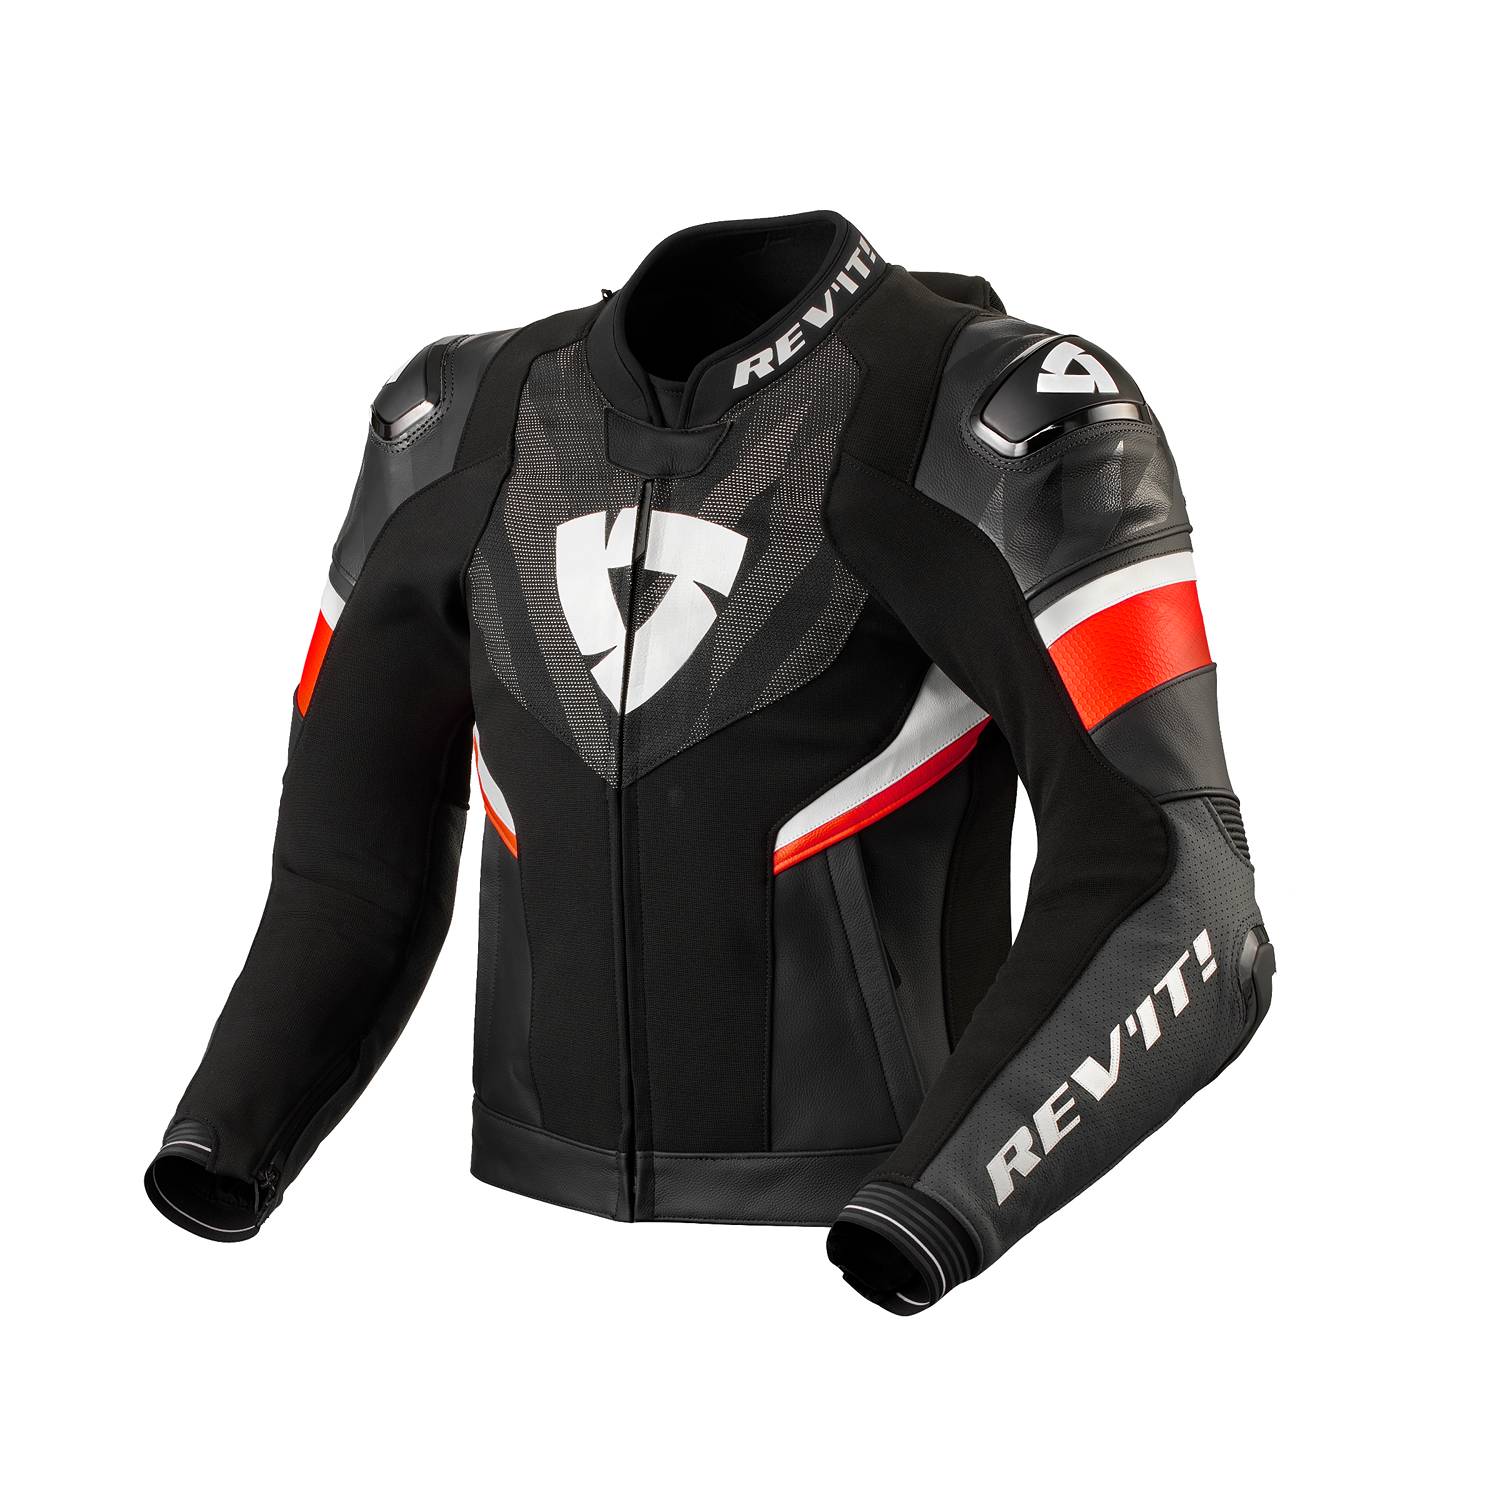 Image of REV'IT! Hyperspeed 2 Pro Jacket Black Neon Red Size 52 ID 8700001358736